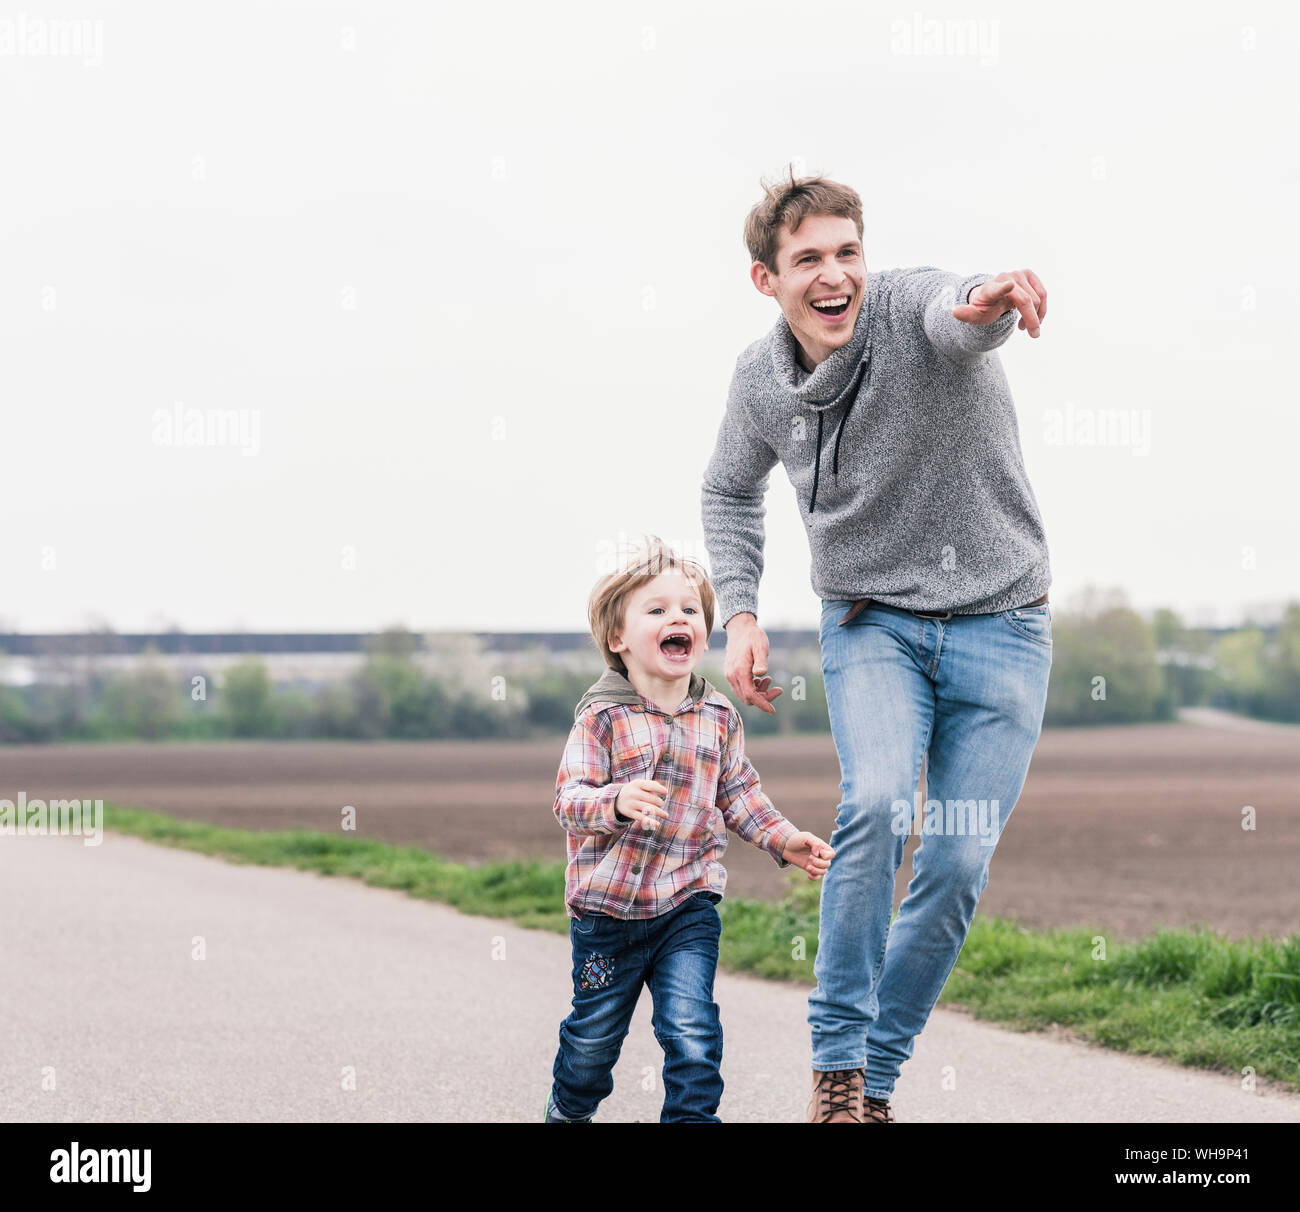 Father and son having fun, outdoors Stock Photo